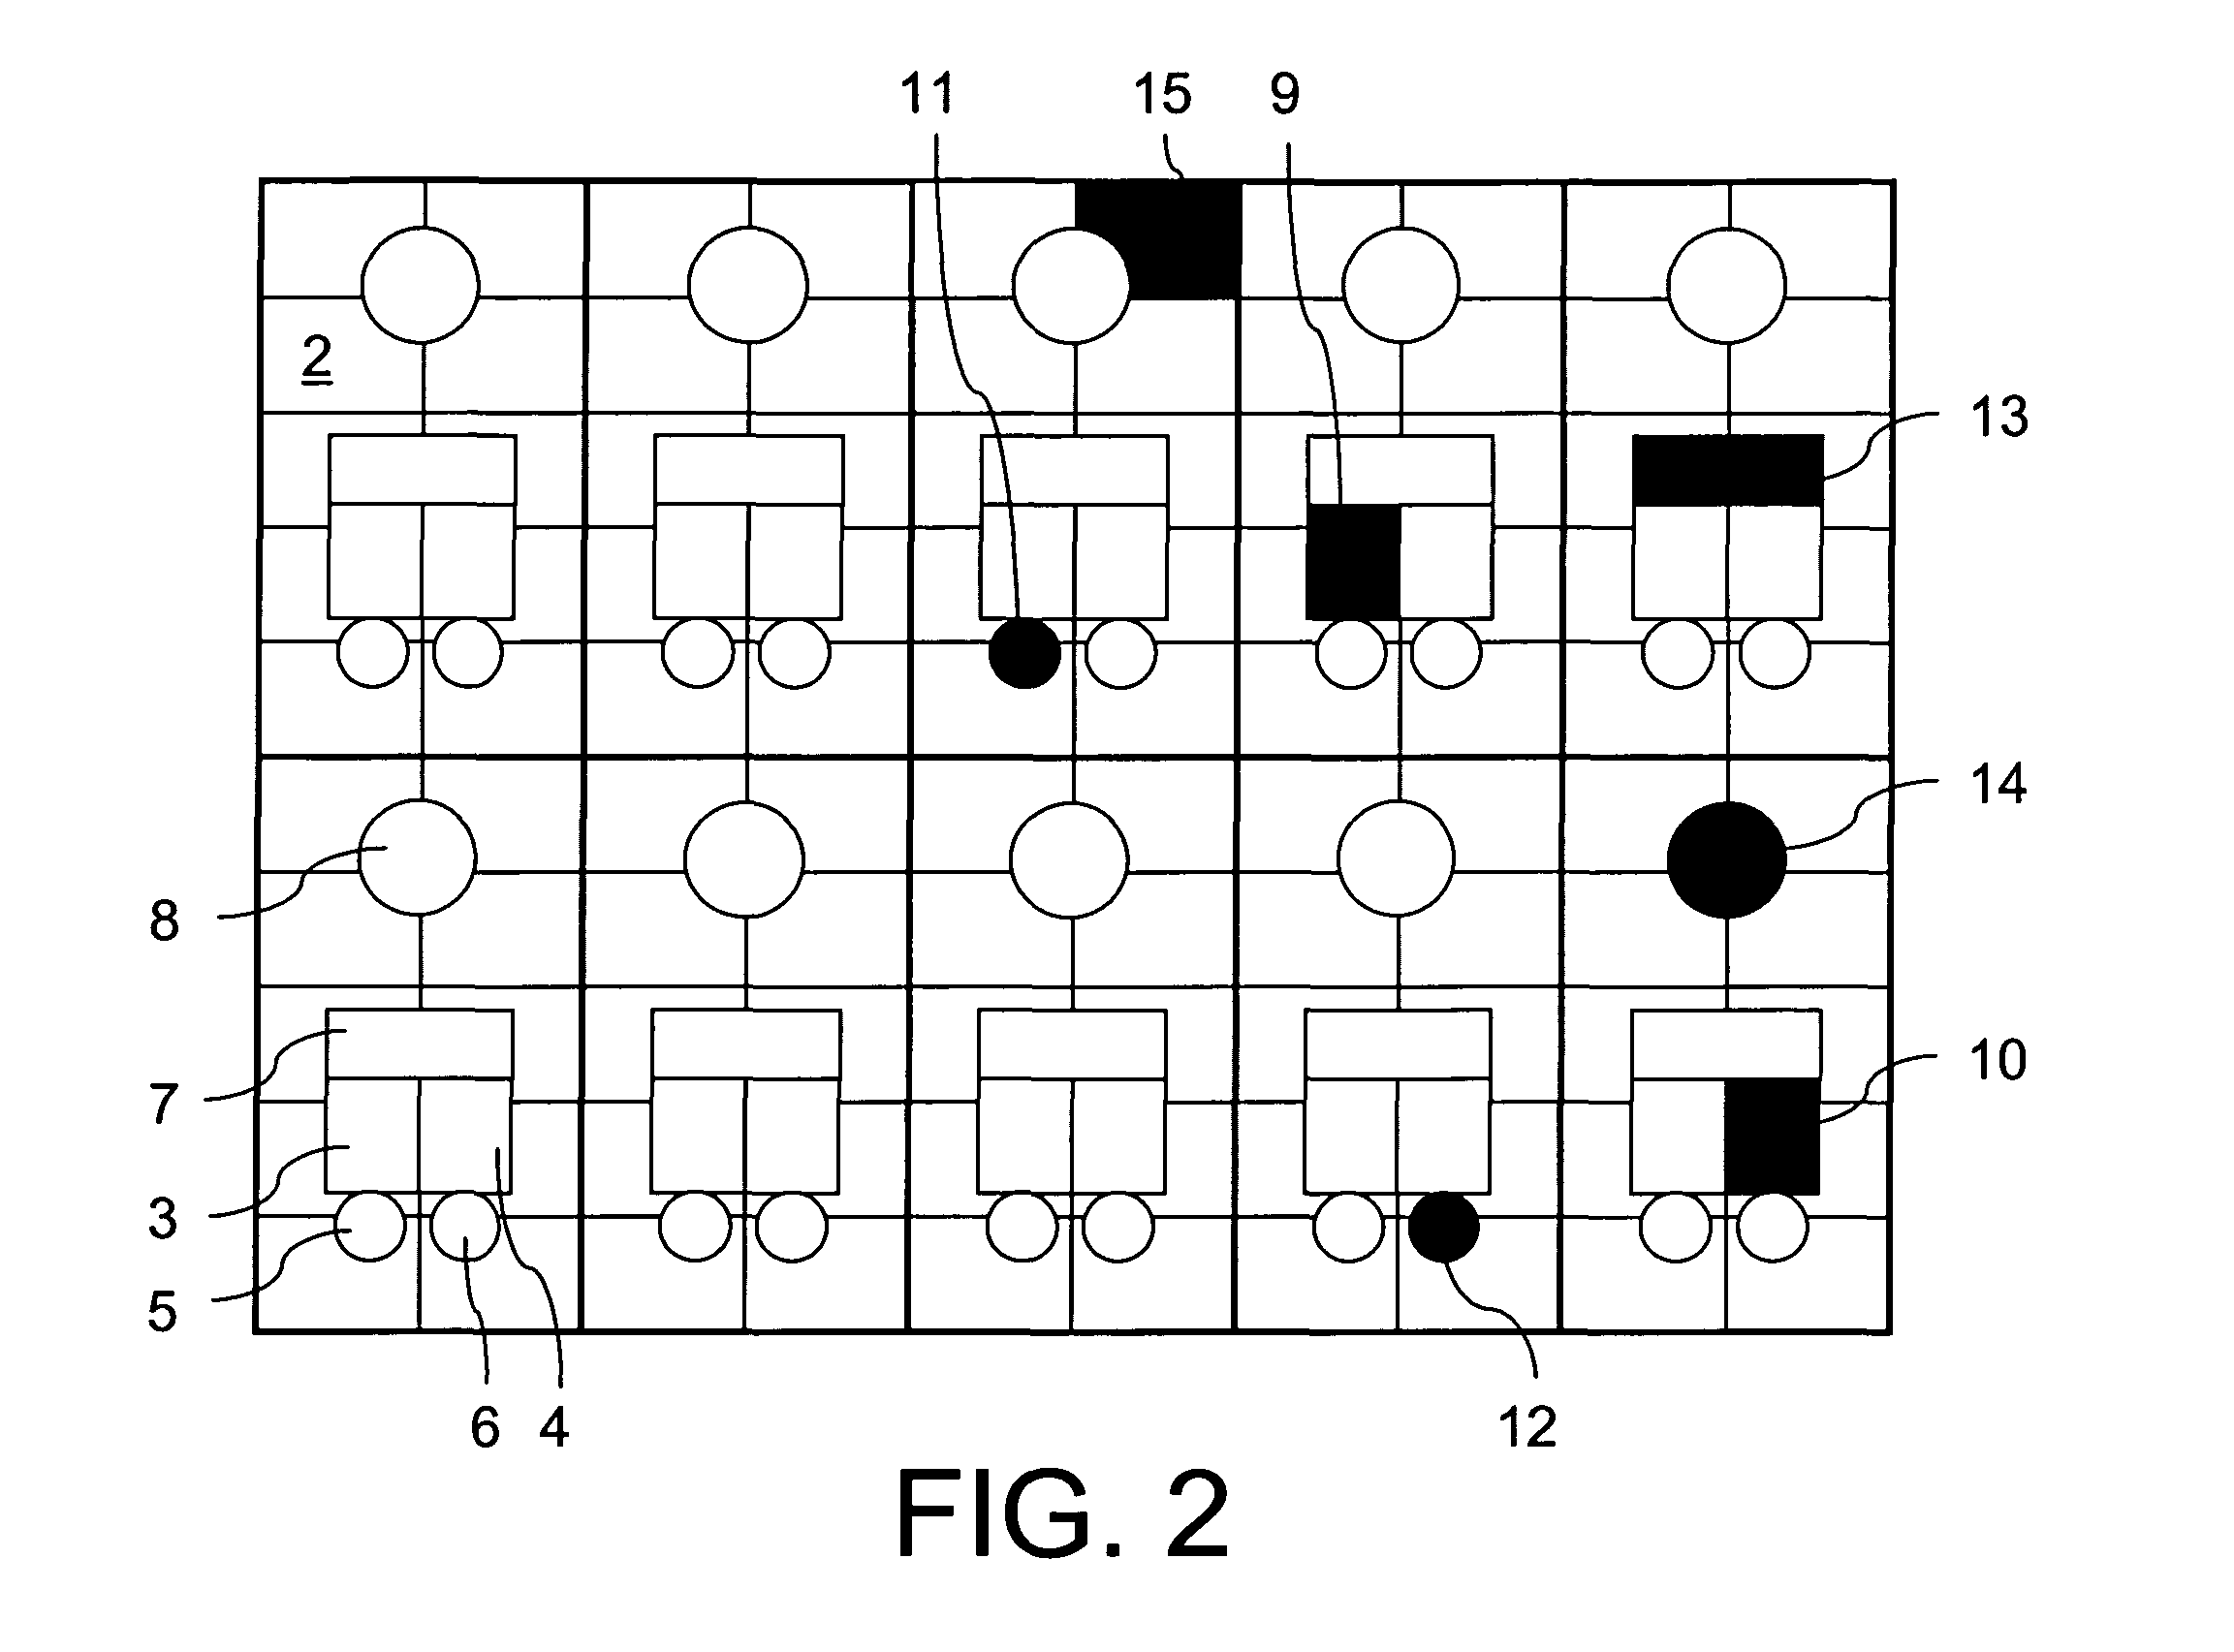 Method for power sharing and controlling the status of a display wall